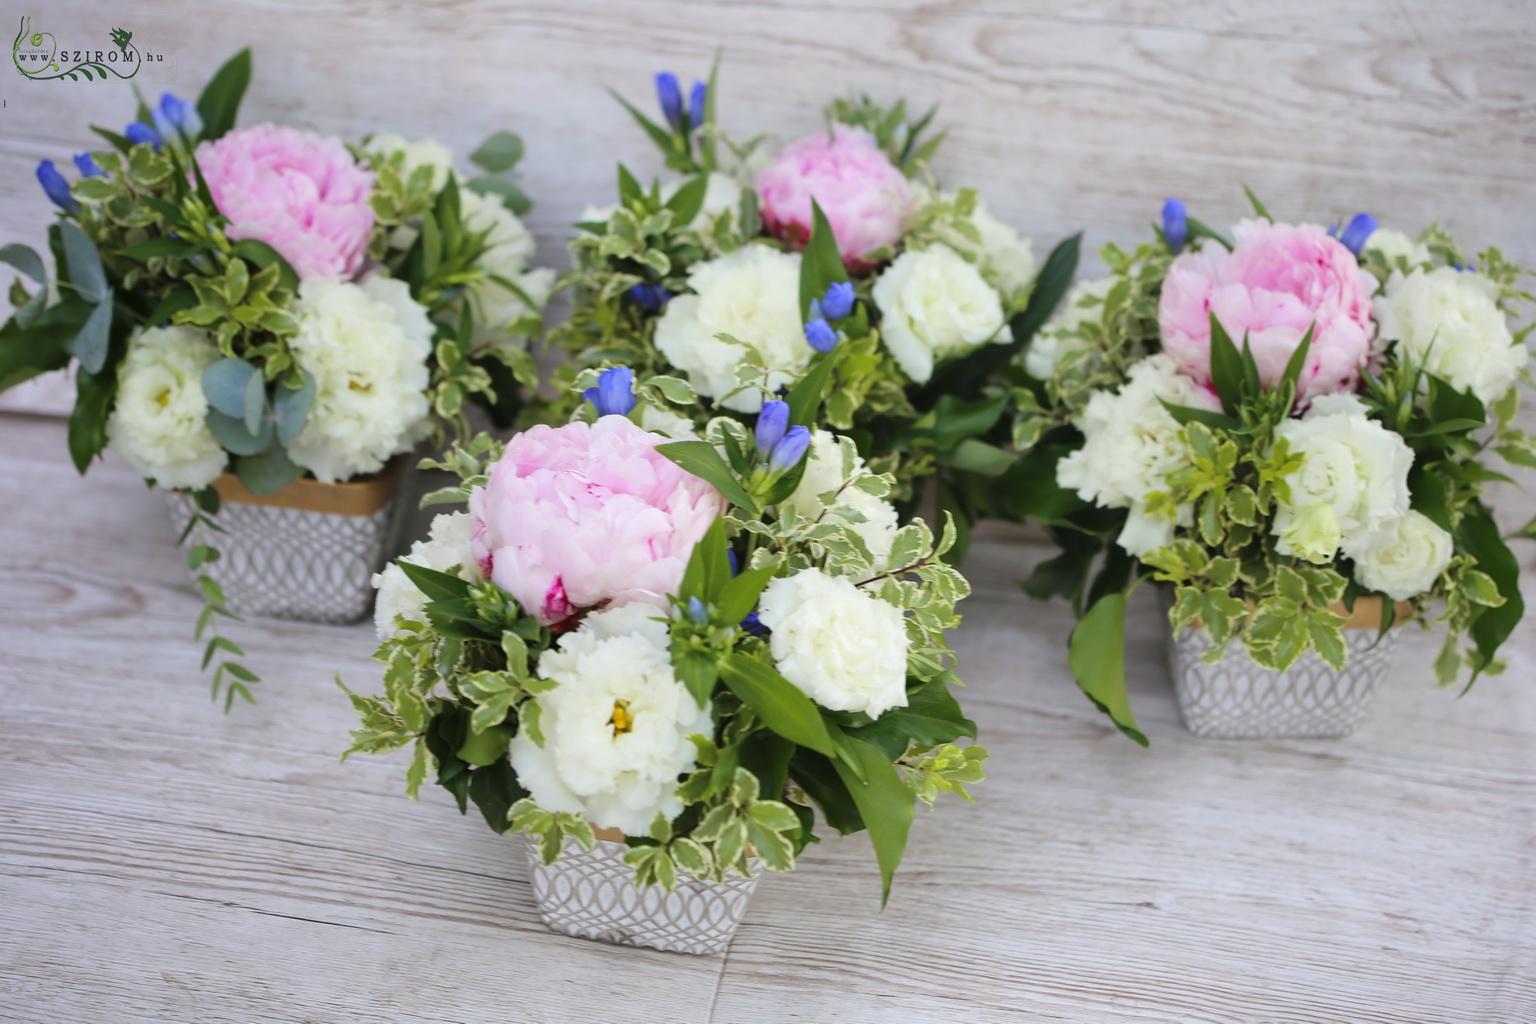 flower delivery Budapest - Centerpiece in concrete pot 1 db (peony, lisianthus, gentian, pink, cream, blue)